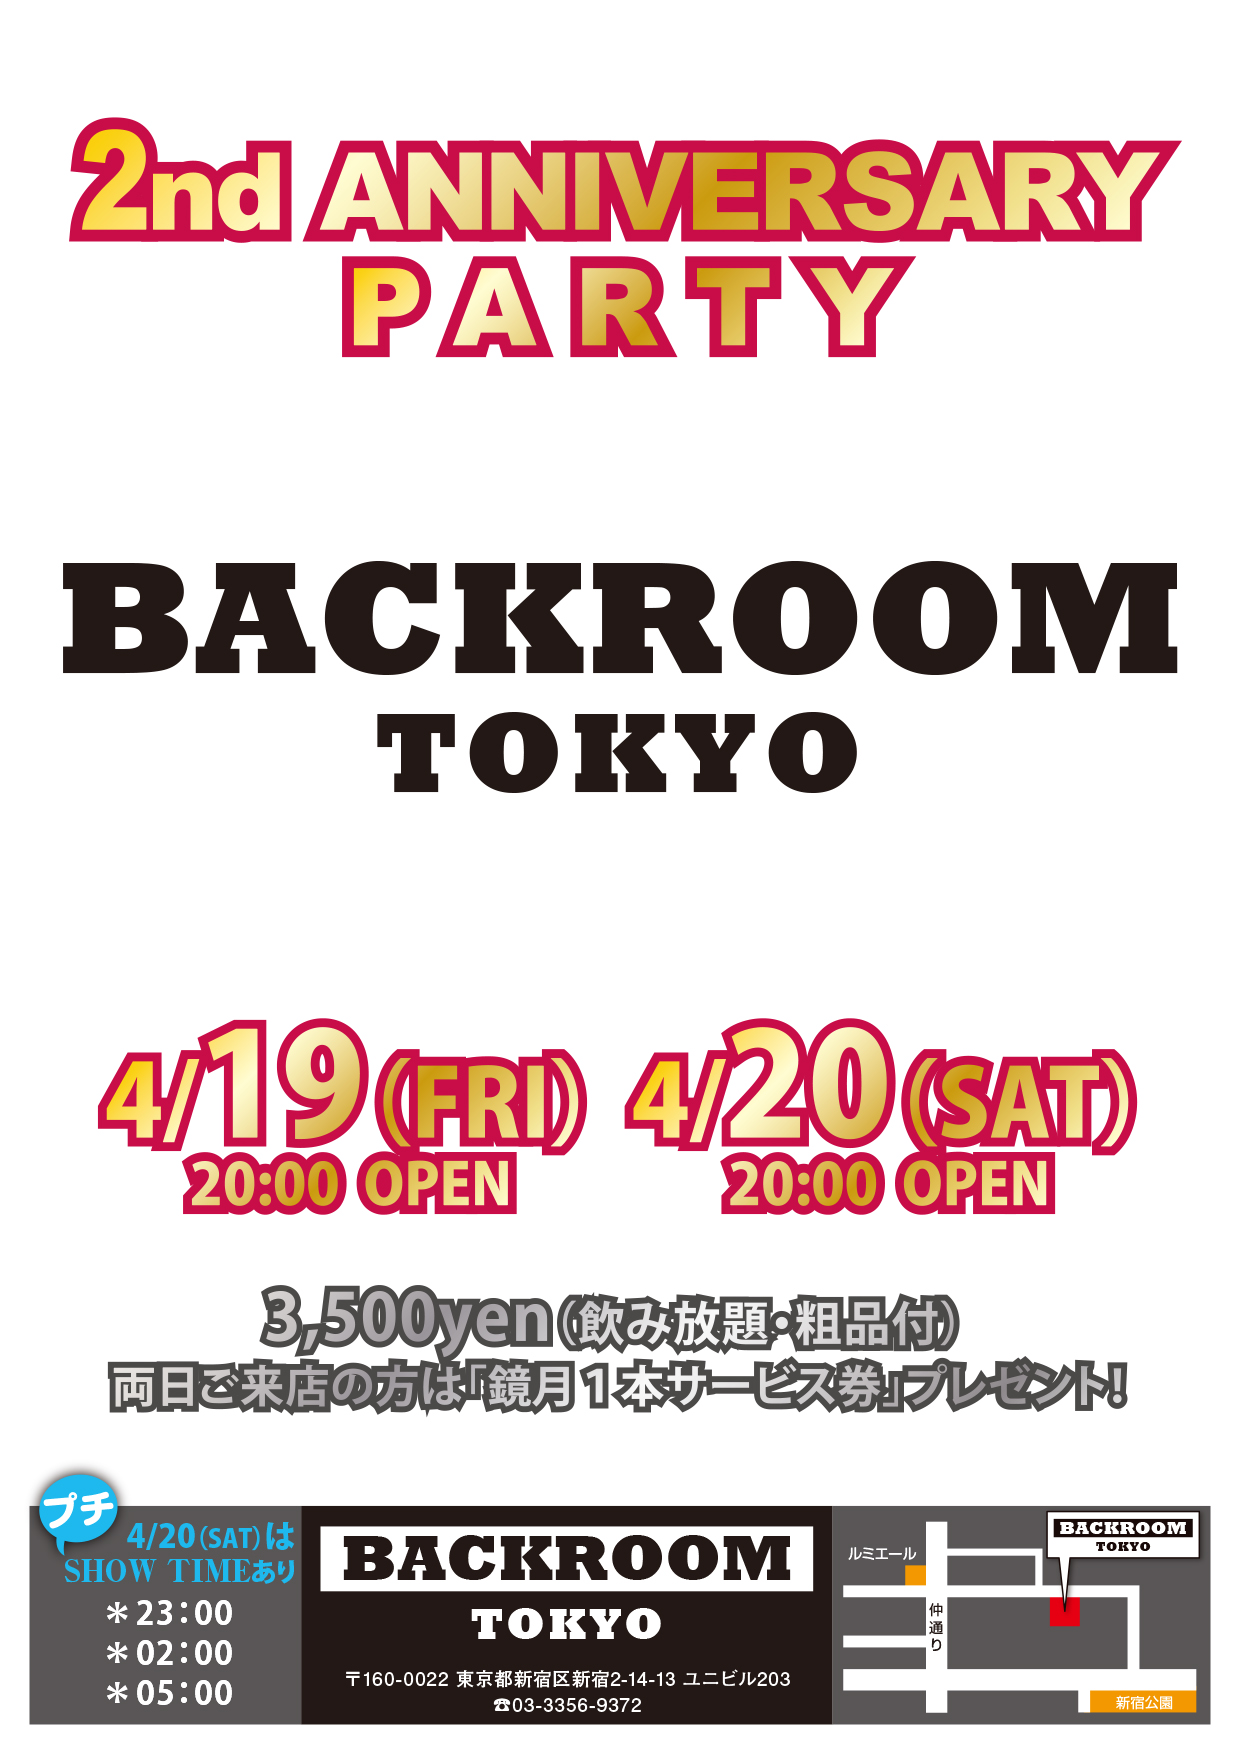 BACKROOM TOKYO 2nd ANNIVERSARY PARTY